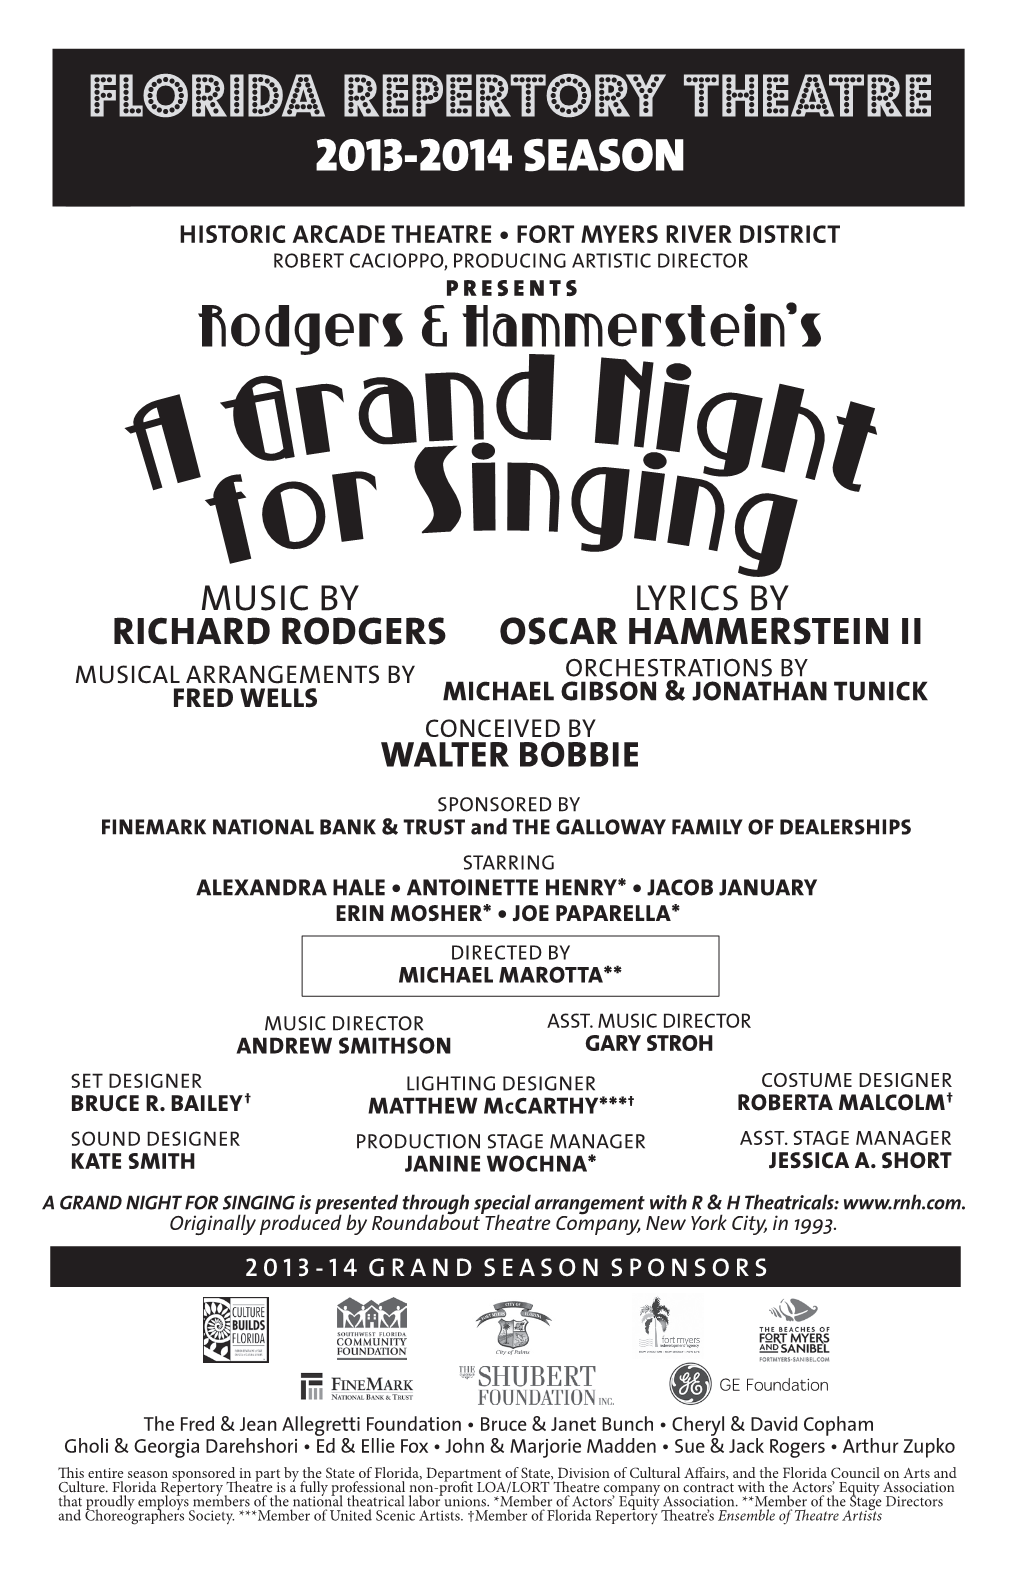 A GRAND NIGHT for SINGING Is Presented Through Special Arrangement with R & H Theatricals